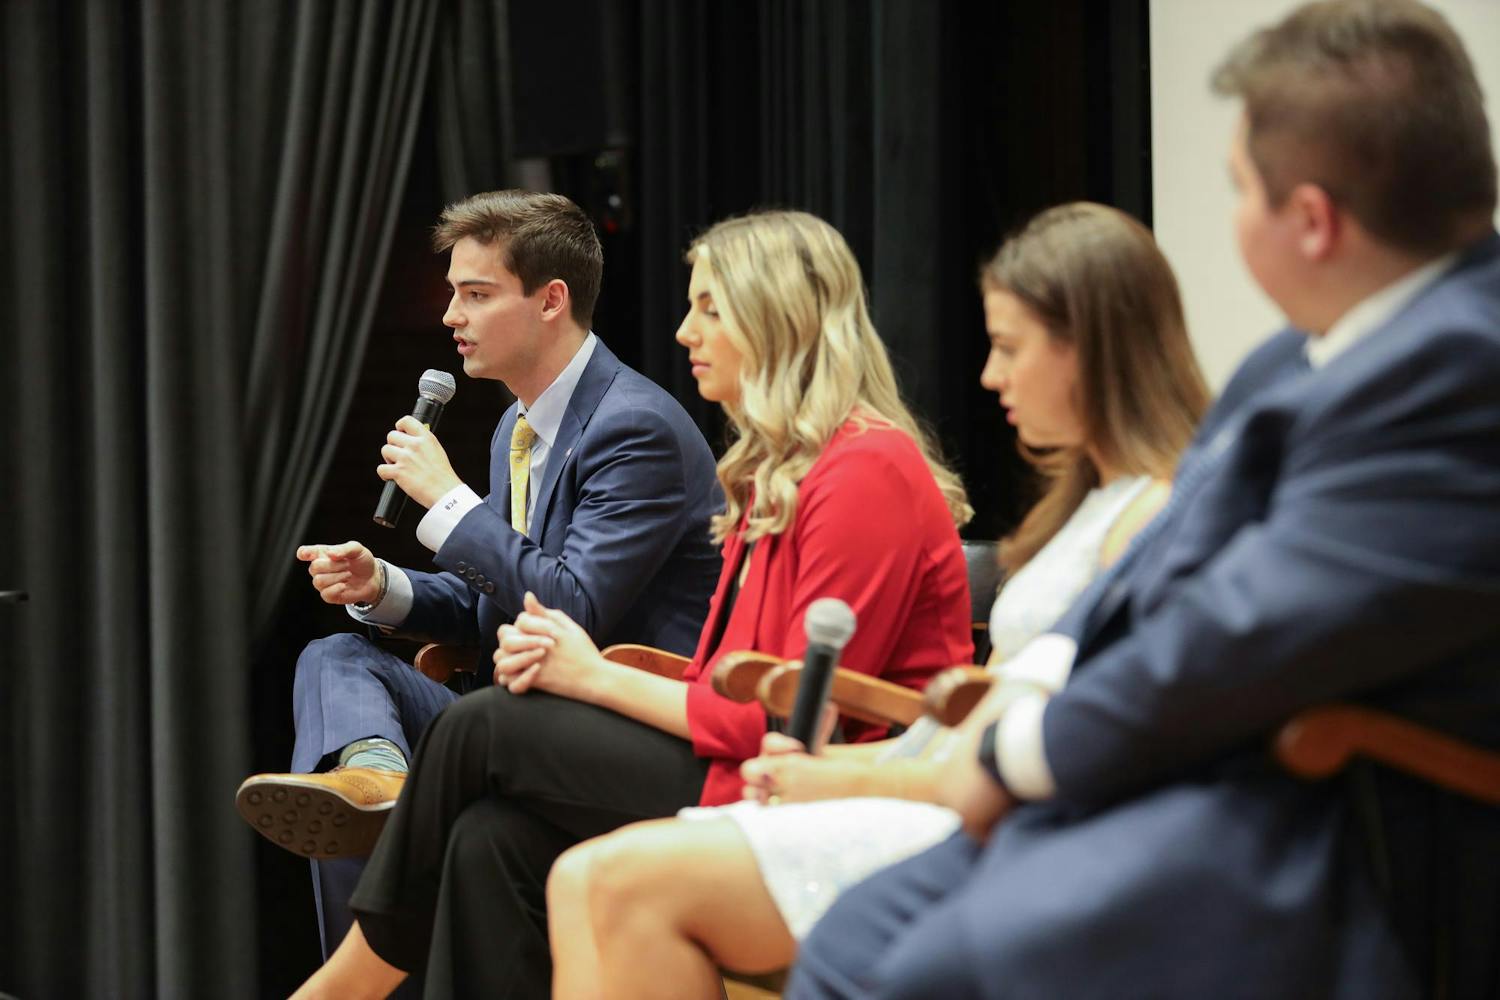 The Student Government executive candidates for ɫɫƵ body president, vice president, speaker of the senate and treasuer answer questions during the Student Government debate on Feb. 14, 2024. From left to right sits Patton Byars, Courtney Tkacs, Maura Hamilton and Jacob Vaught, all of whom run uncontested.